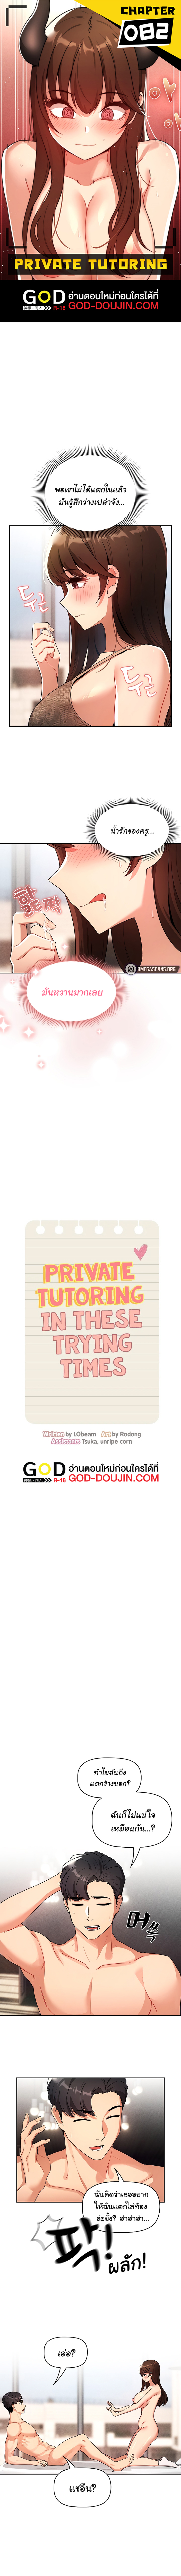 Private Tutoring in These Trying Times01